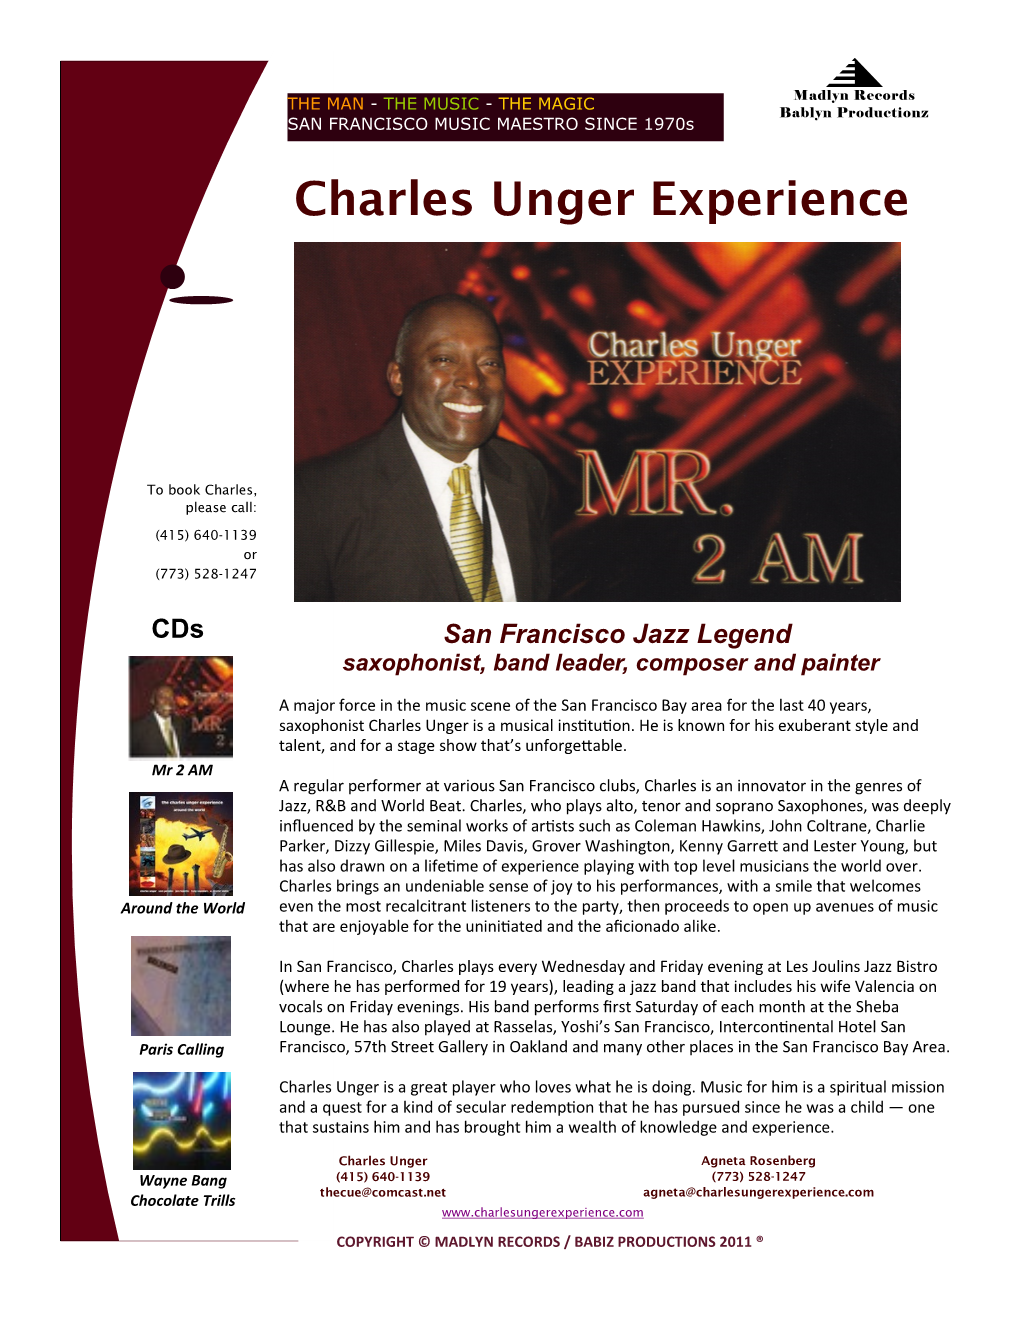 Charles Unger Experience Bio, Quotes and Review